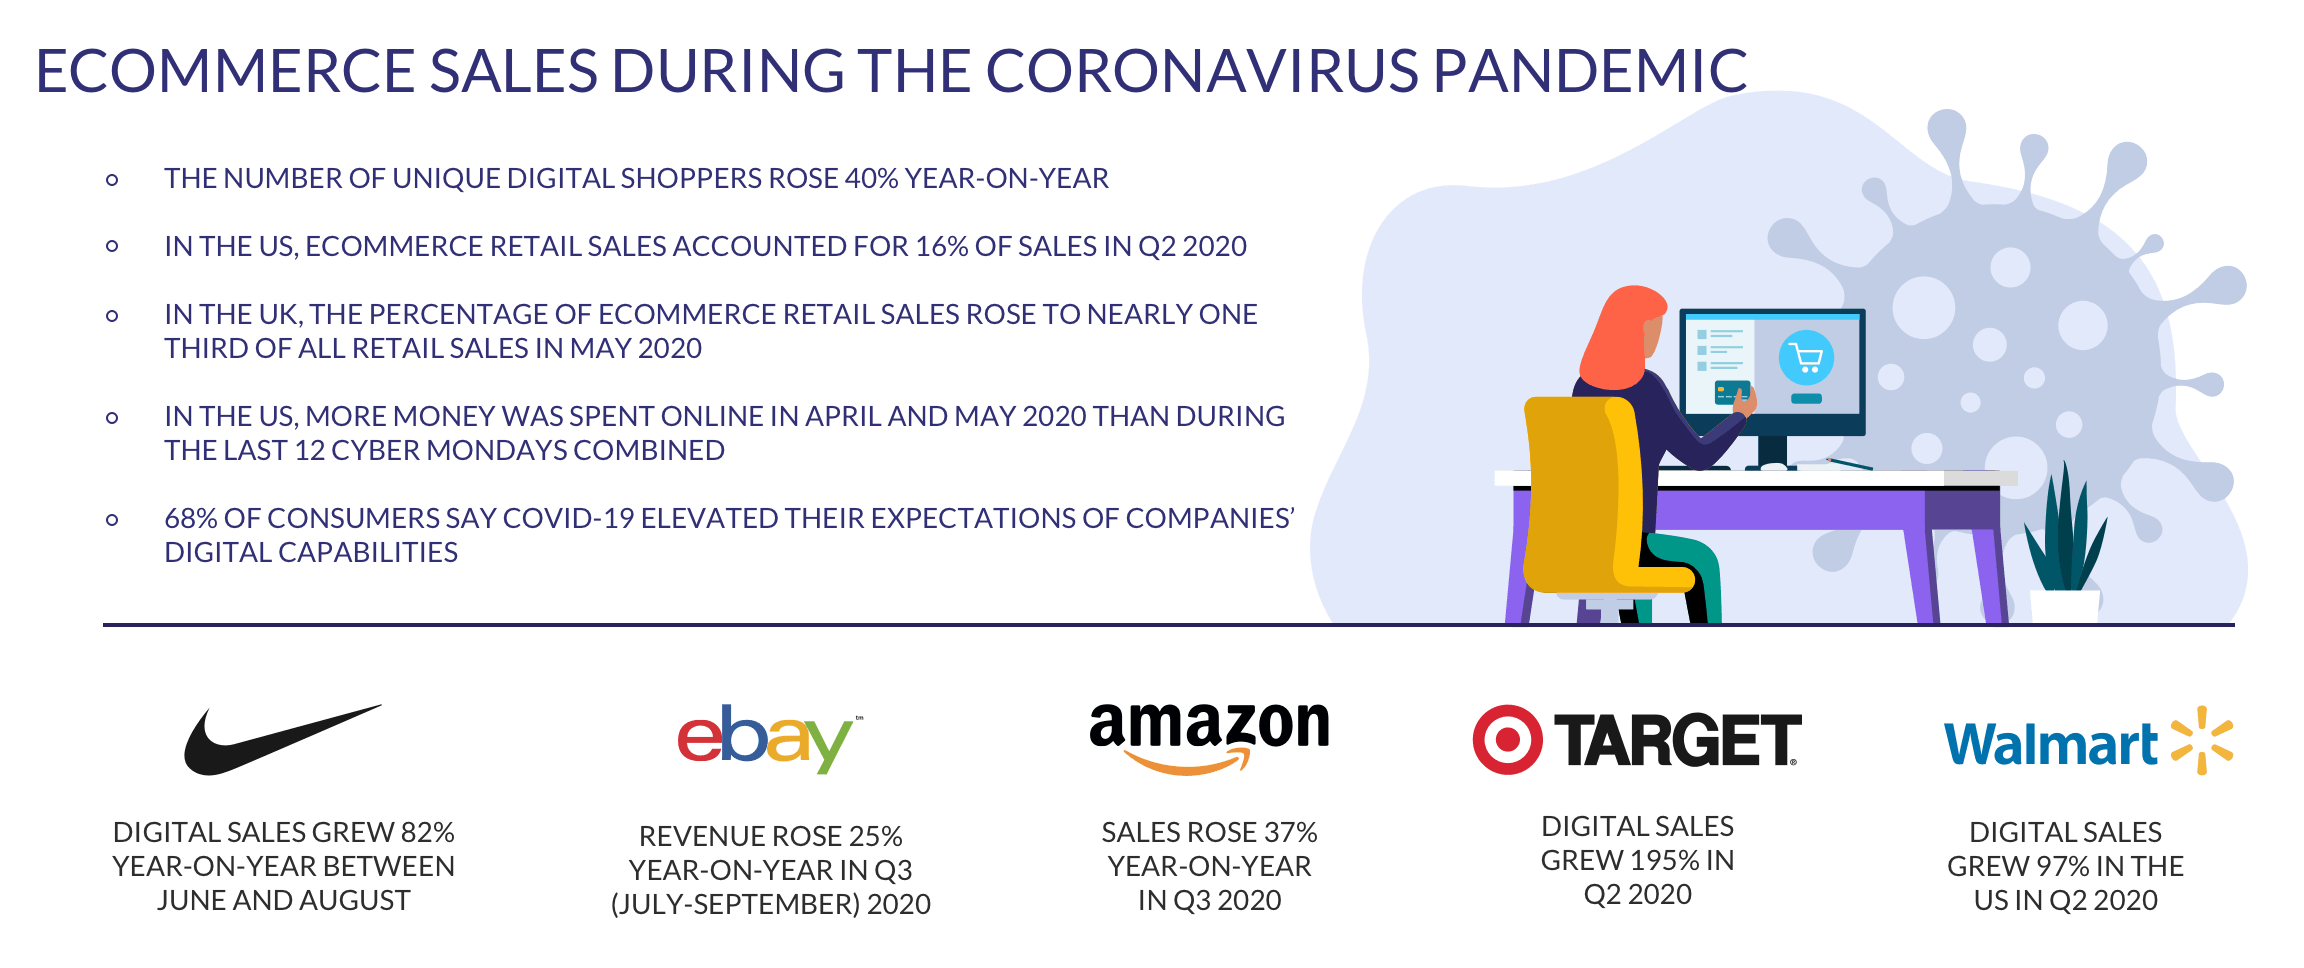 ecommerce-sales-during-pandemic